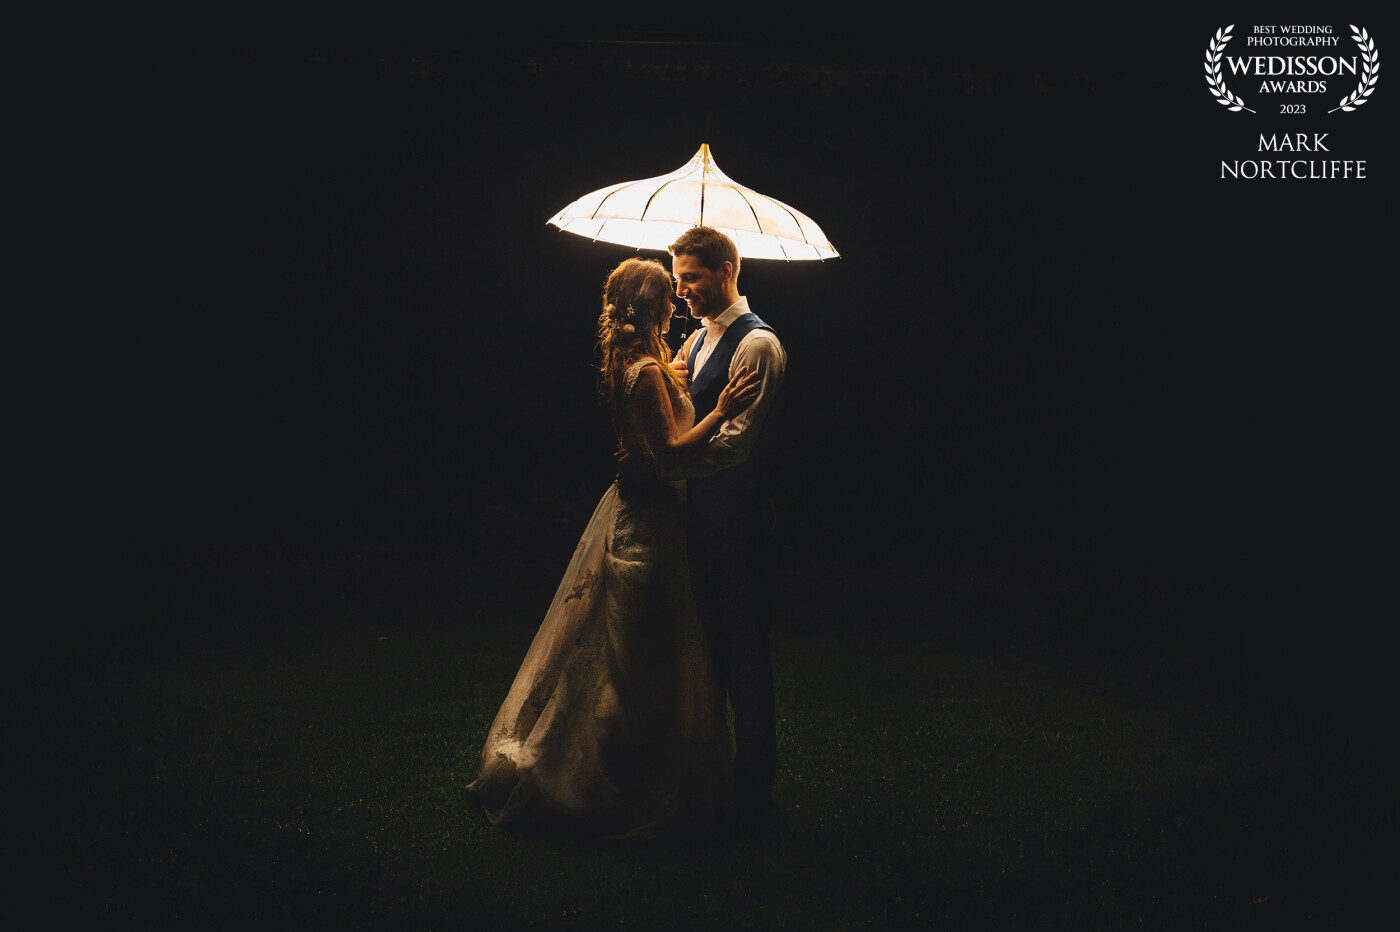 This was taken just as I was about to leave the wedding. Taking the opportunity to set up lights beforehand as not to keep the couple from their guests too long. A simple light on a stand behind the couple pointing up into the umbrella casting light down. Love when my couples trust me enough to take time away for shots like this.